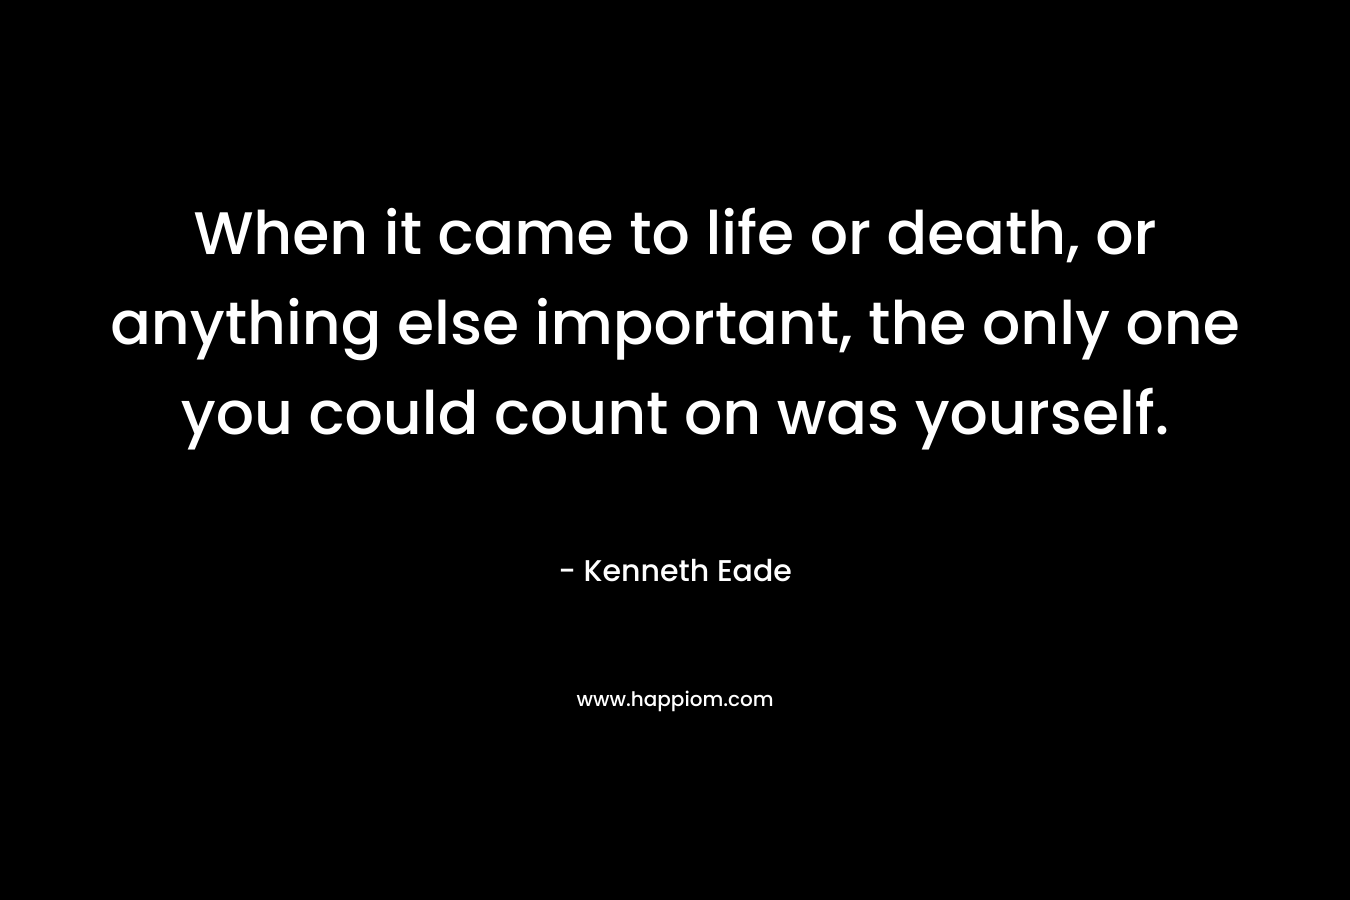 When it came to life or death, or anything else important, the only one you could count on was yourself.